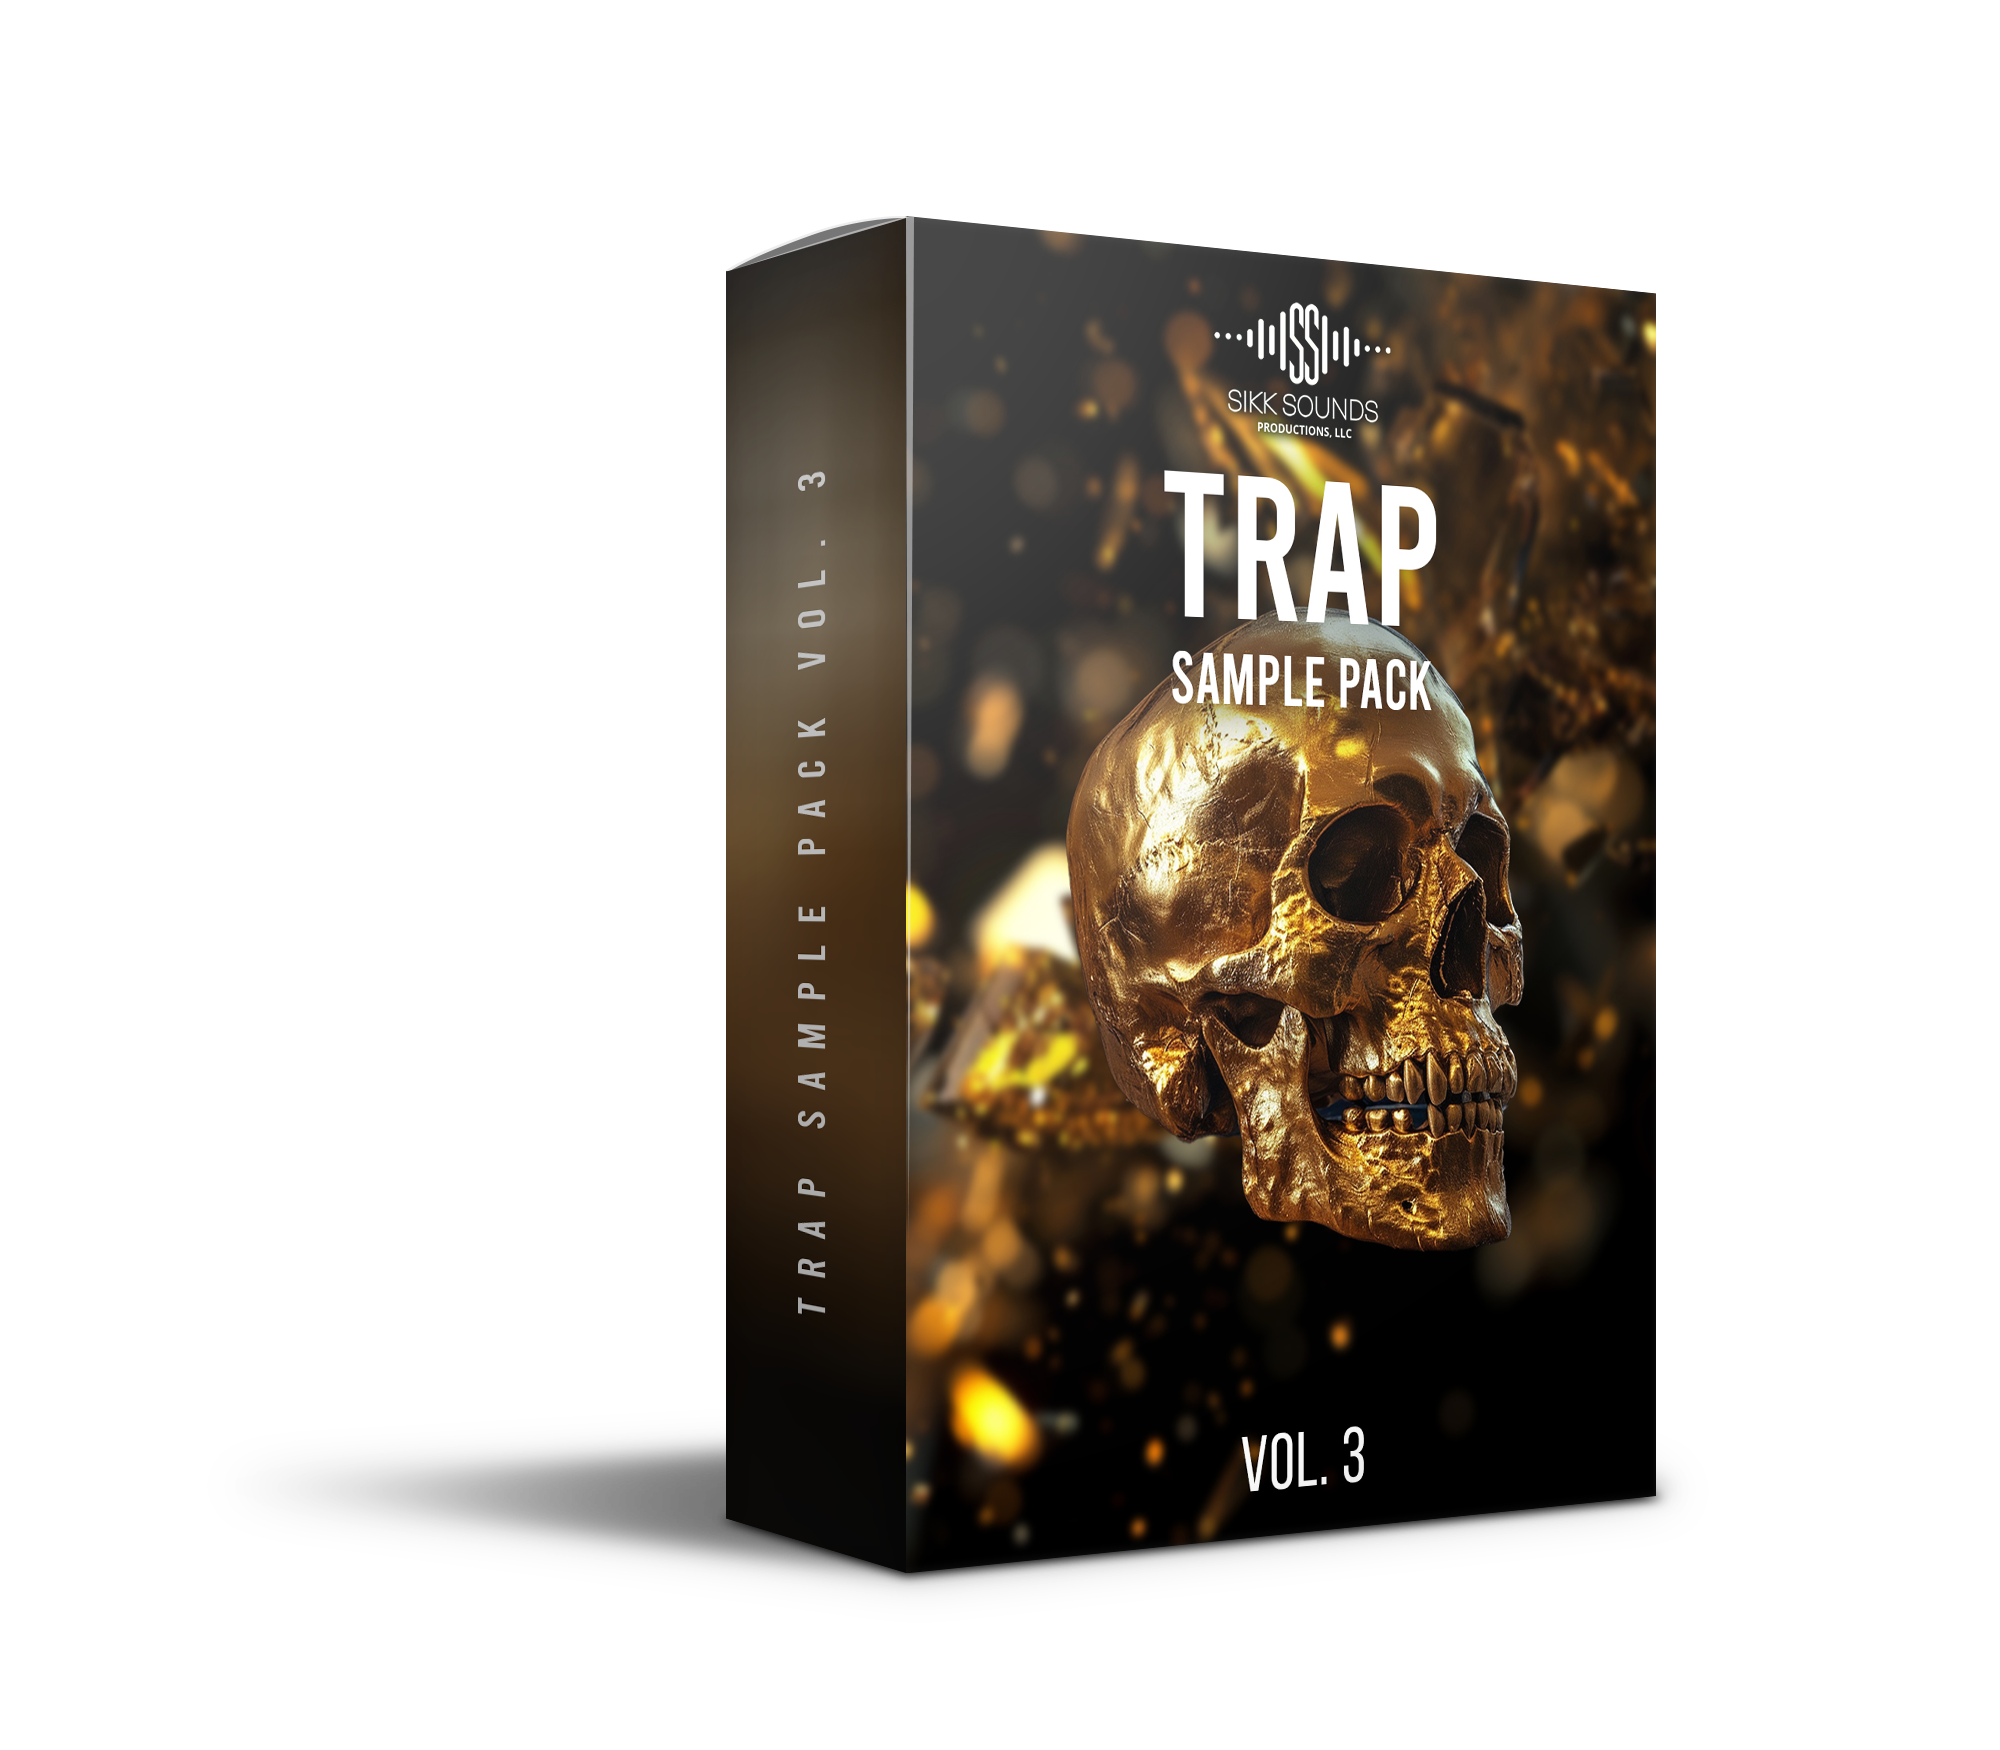 SiKKSounds Trap Sample Pack Vol.3